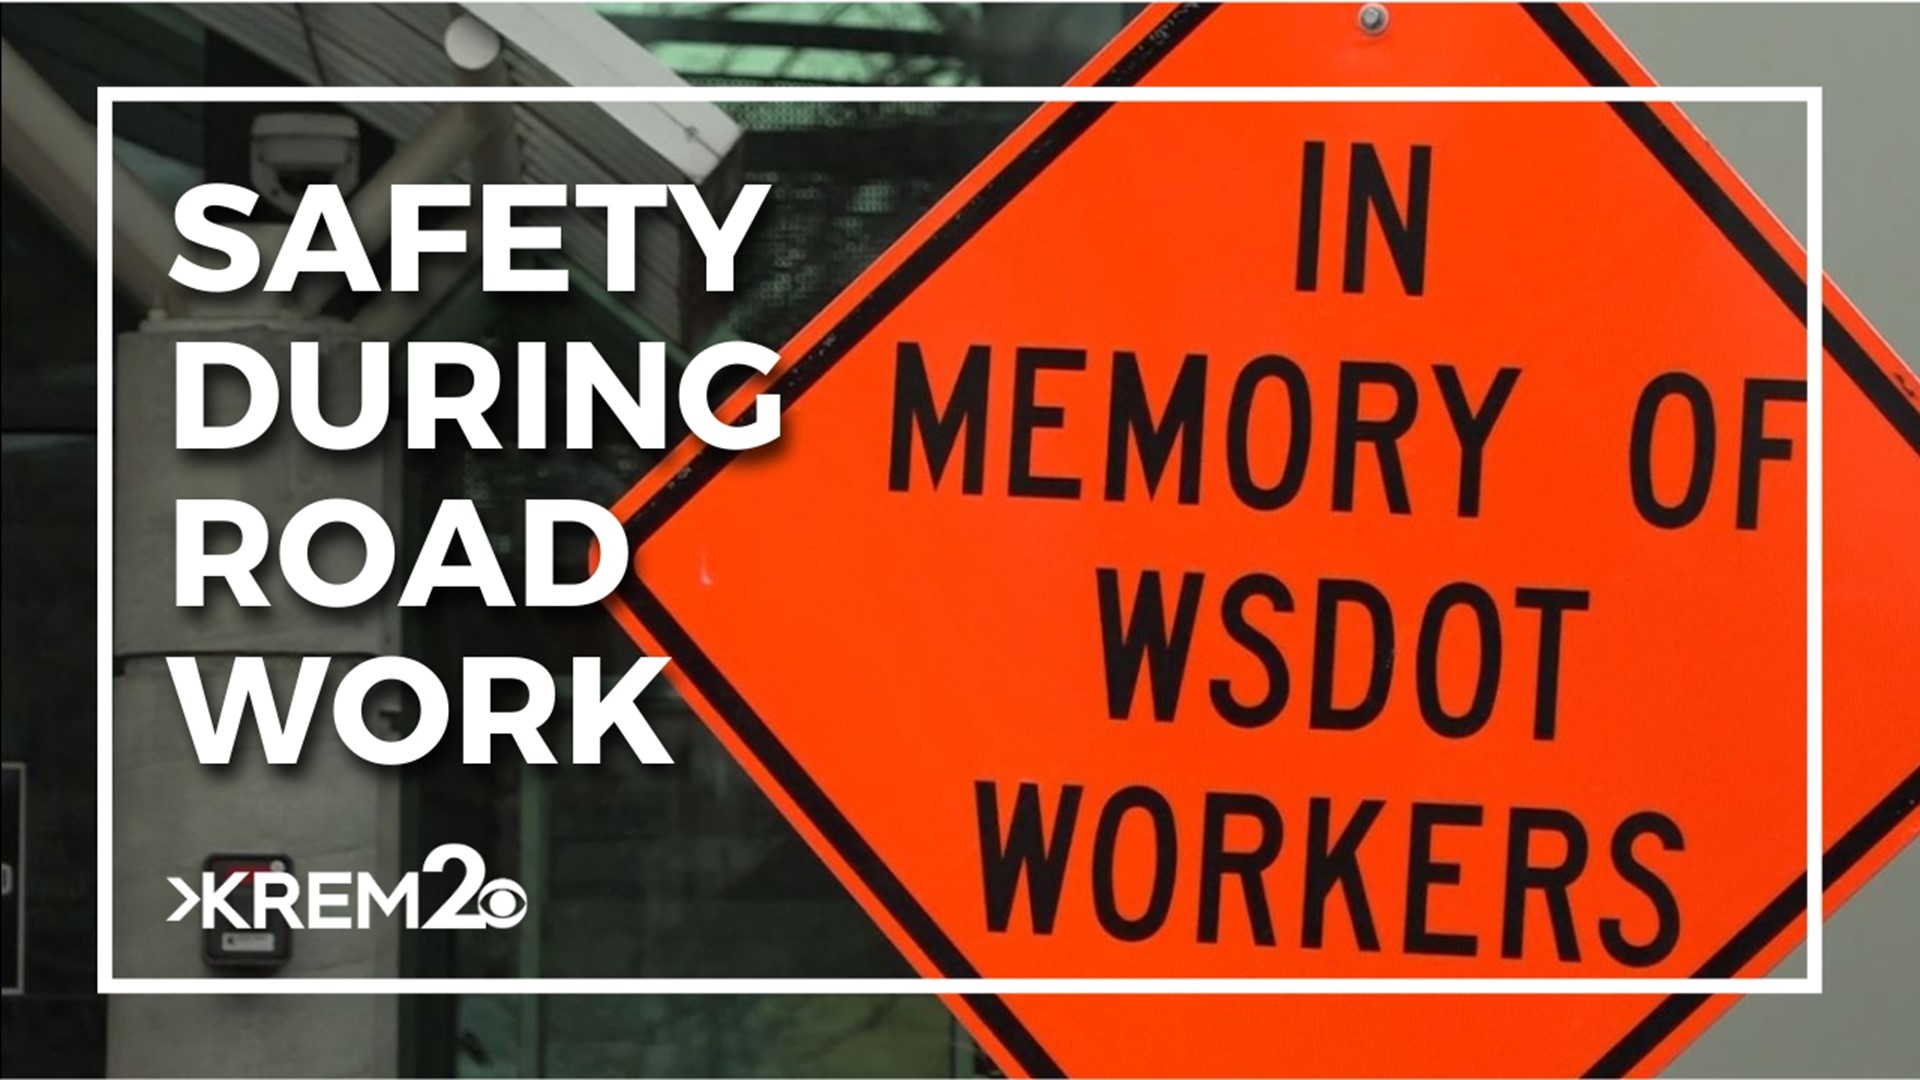 WSDOT says now is the best time to consider worker and driver safety.